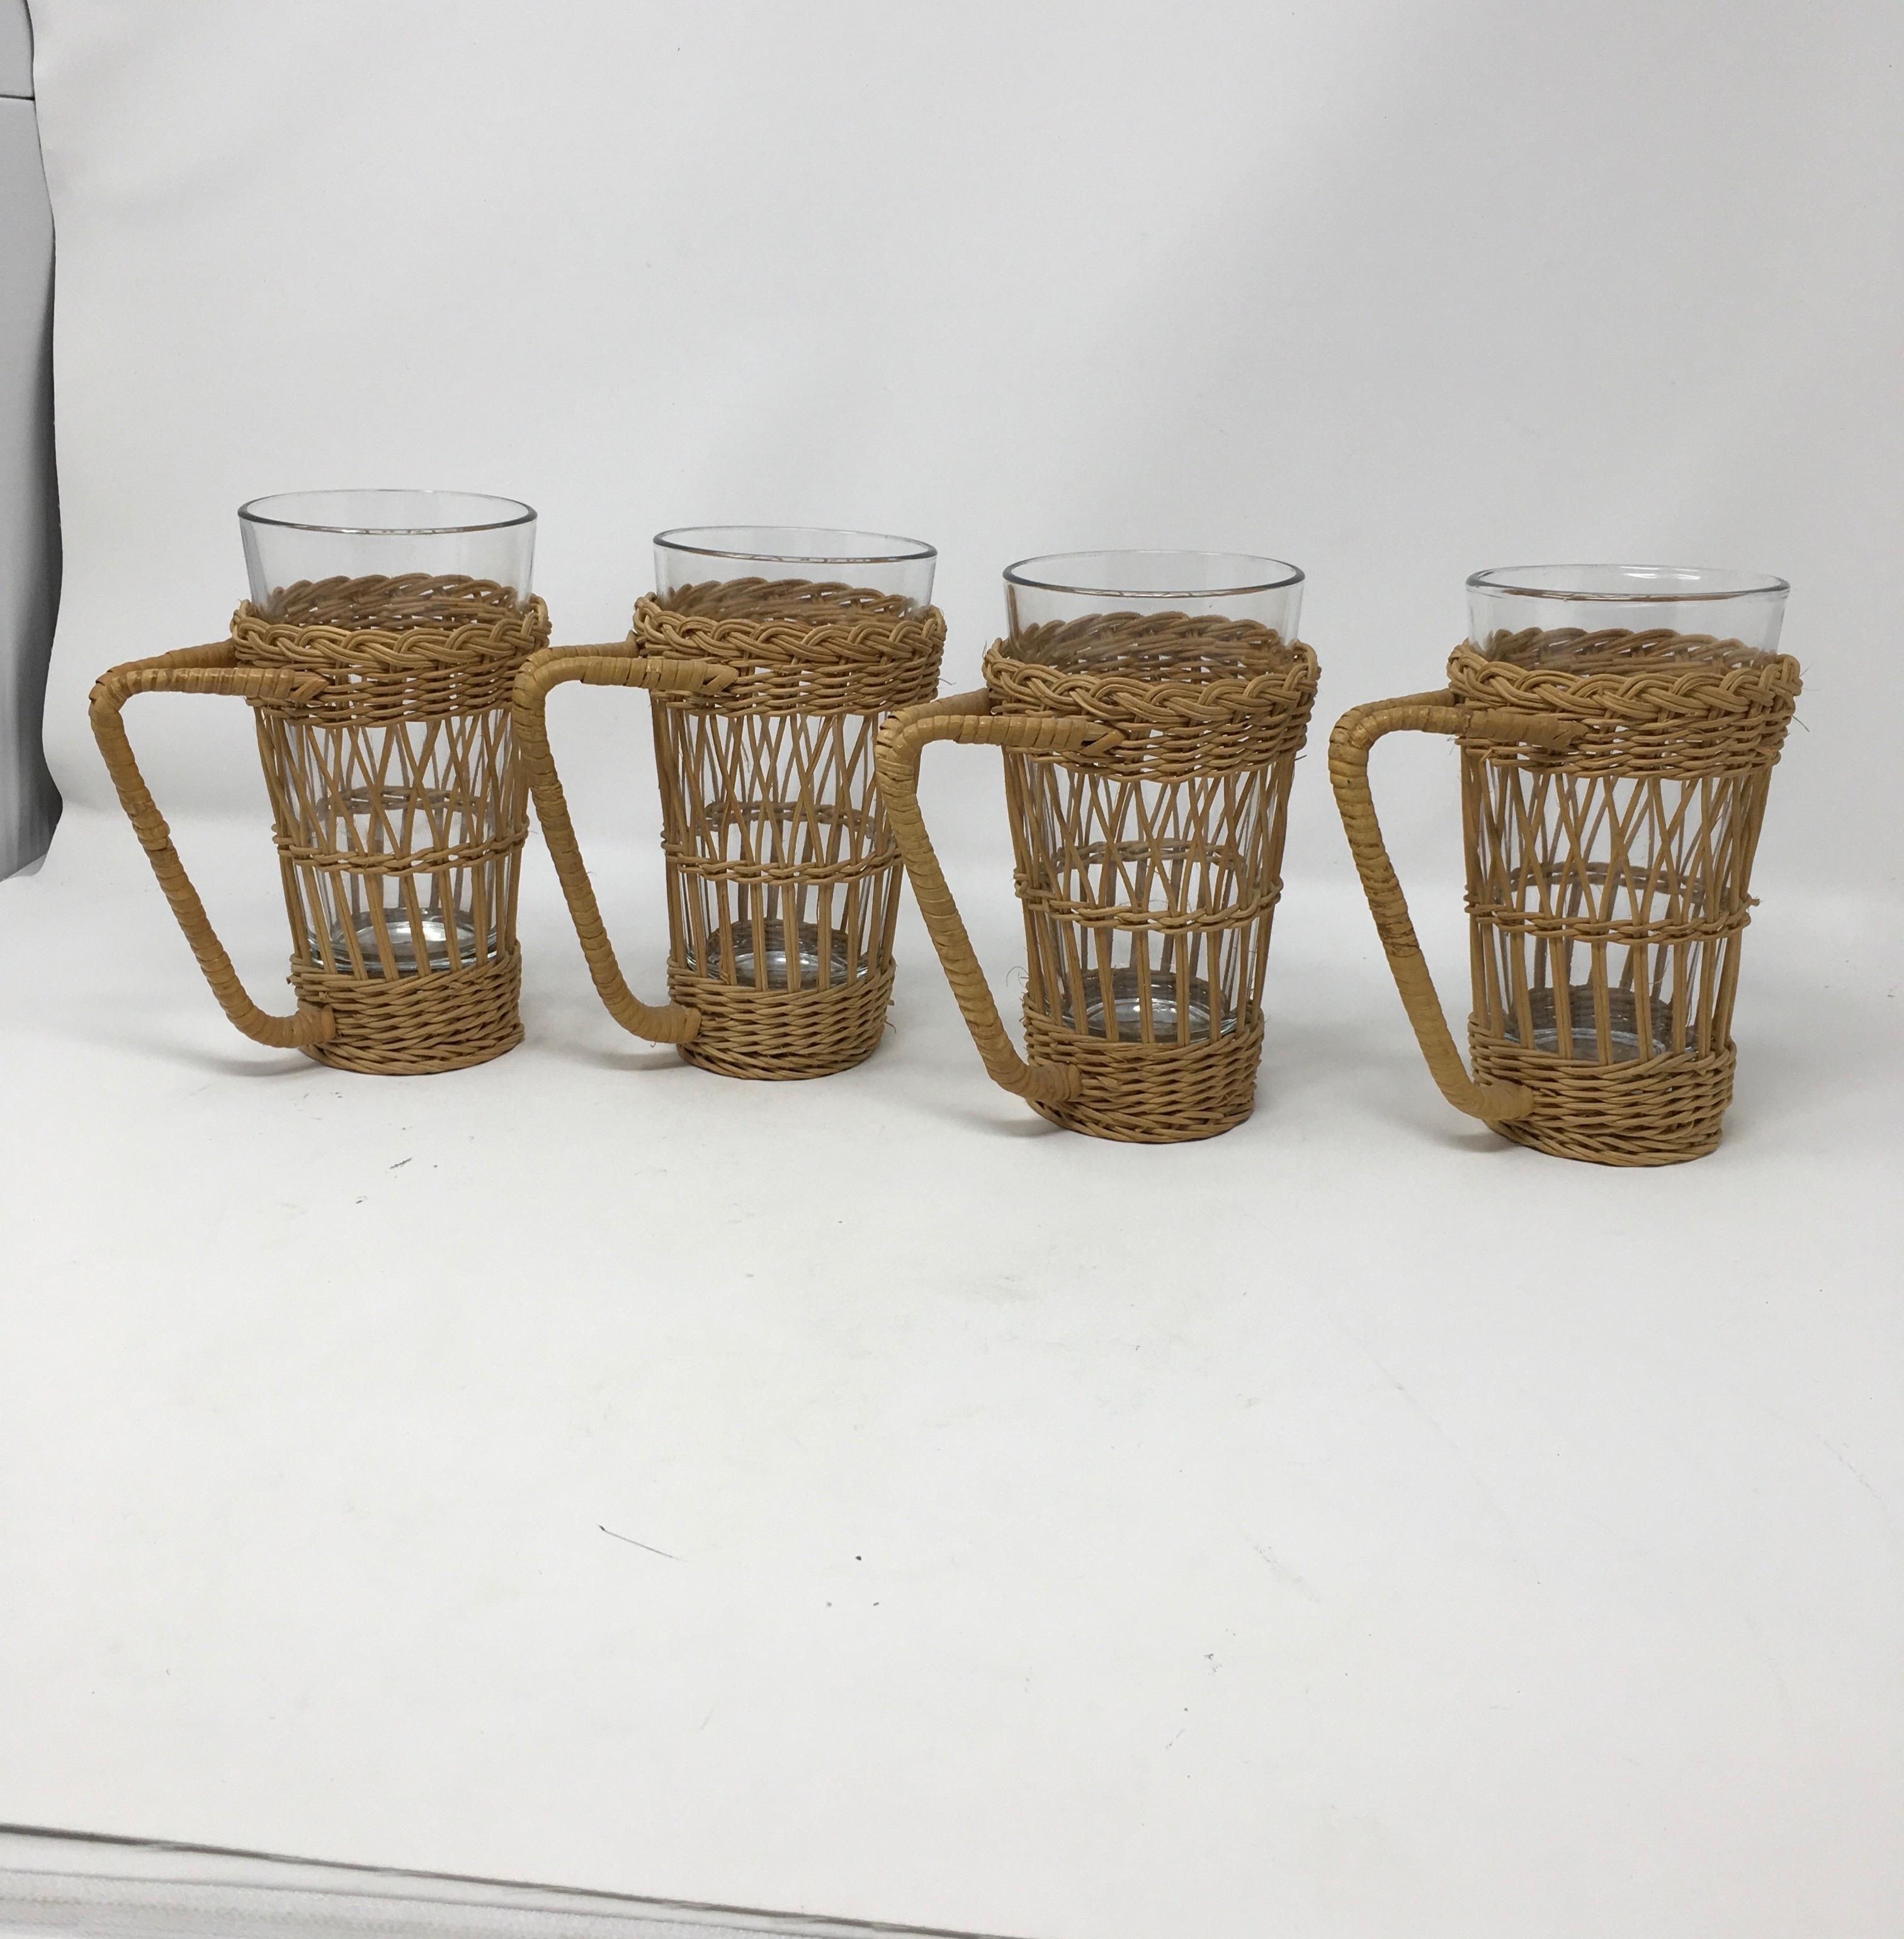 This set of four vintage Wicker rattan glass holders includes four removable glass tumblers. Each holder is intact with sturdy handles to hold both hot and cold beverages.